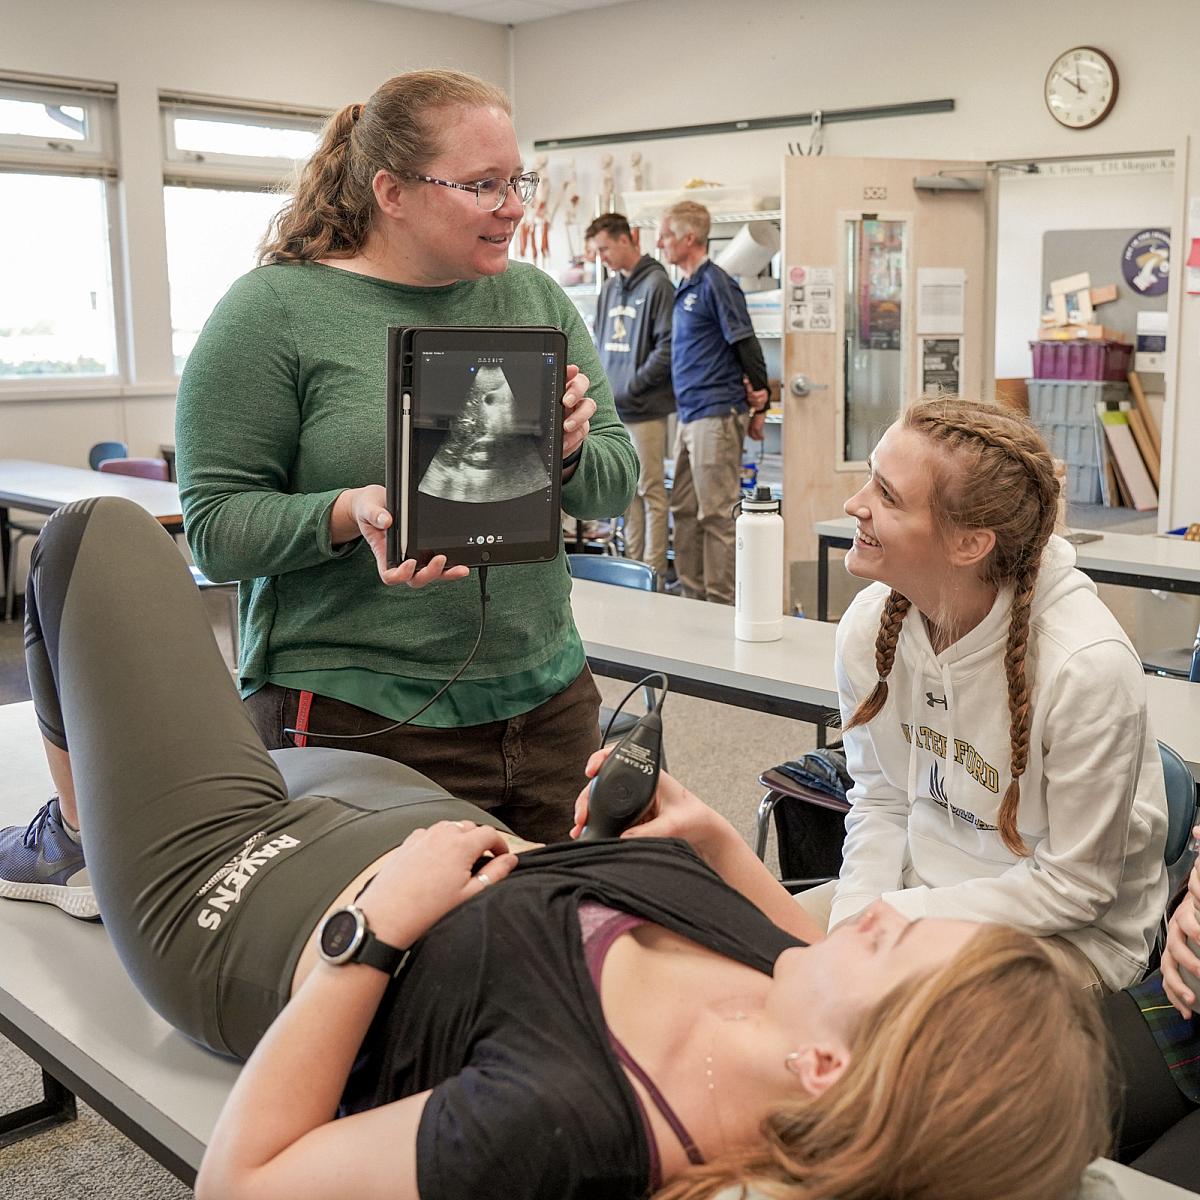 MD Students shoes high school class how to conduct an ultrasound on a portable device and iPad